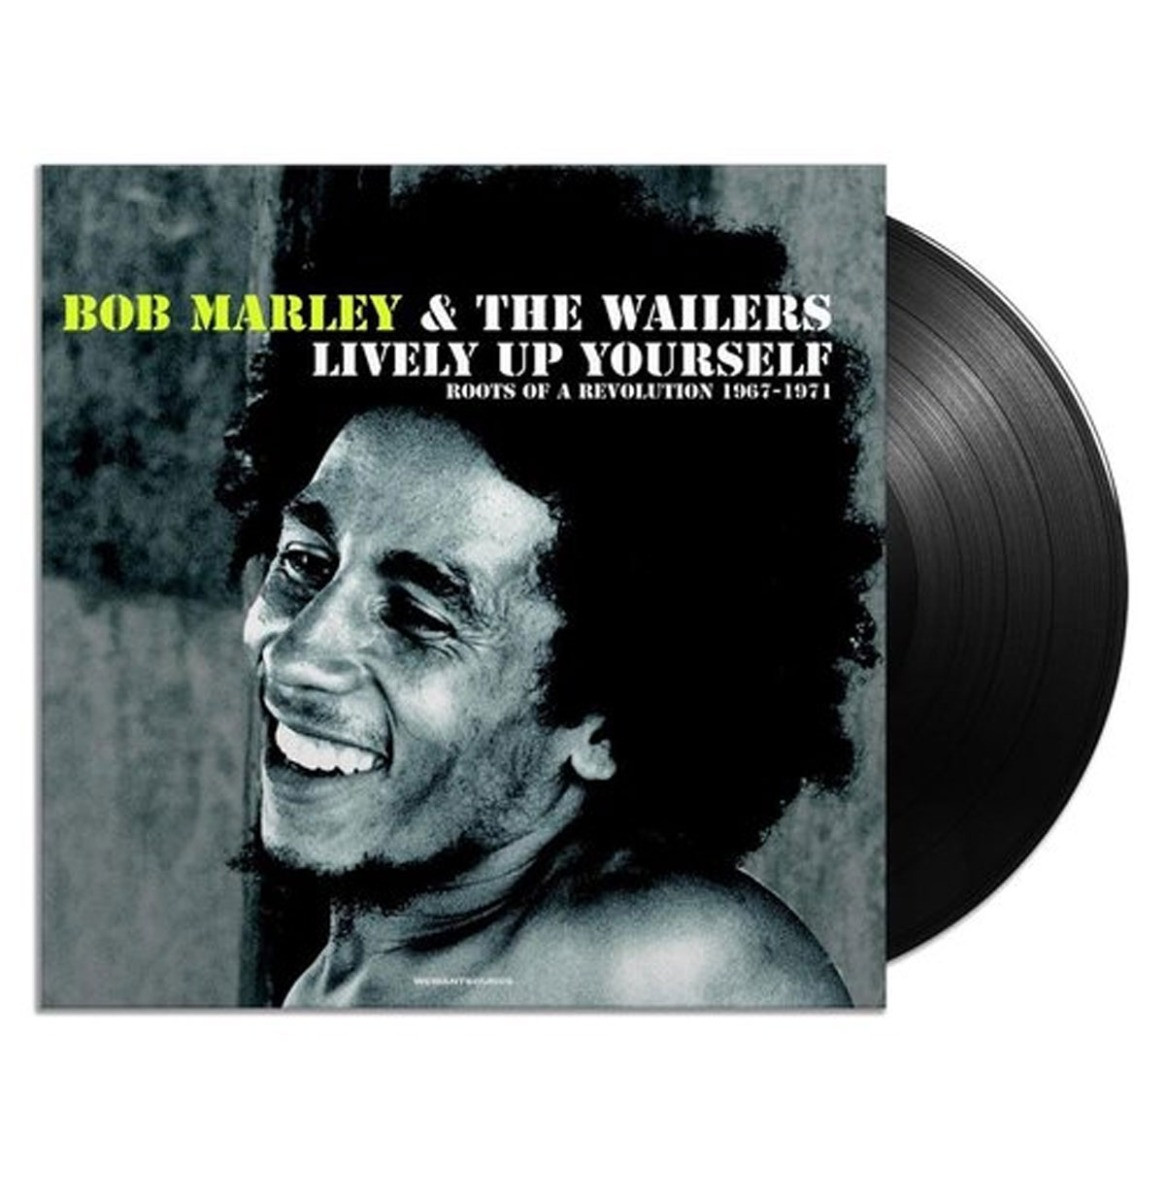 Bob Marley & The Wailers - Lively Up Yourself 2-LP